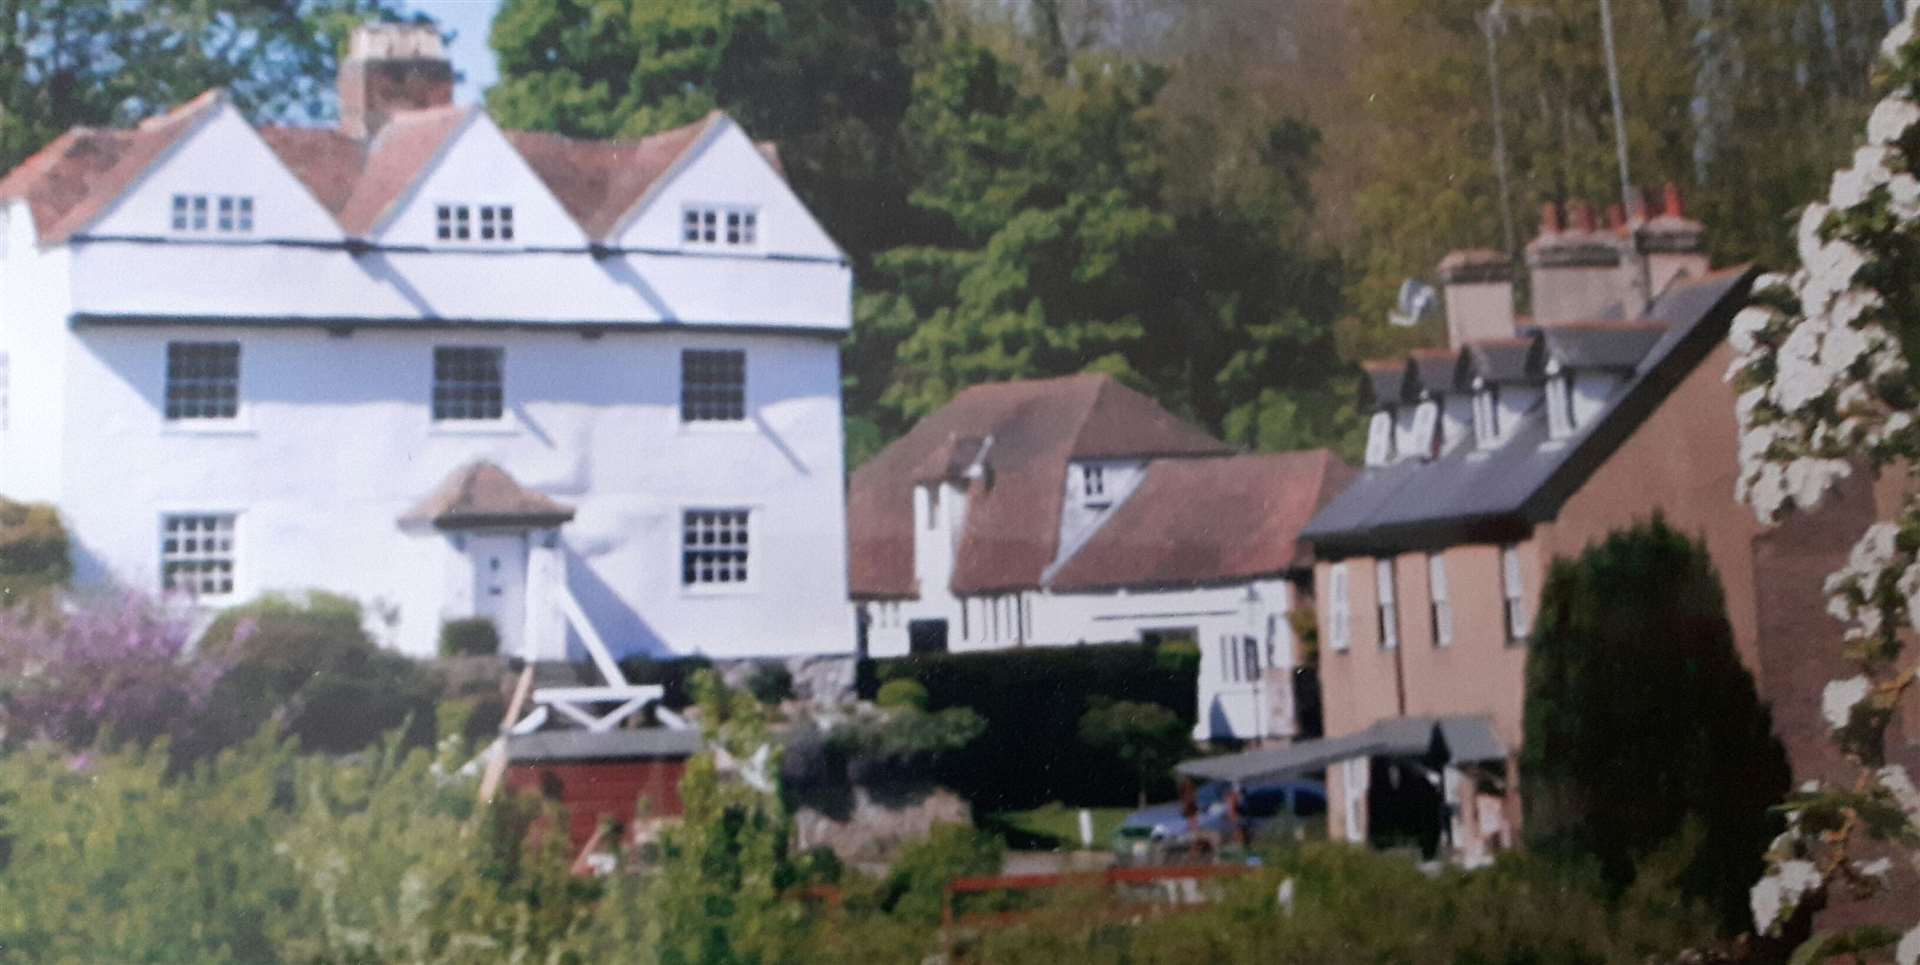 Don Esland's birthplace, Bockingford Mill Cottages, are to the right